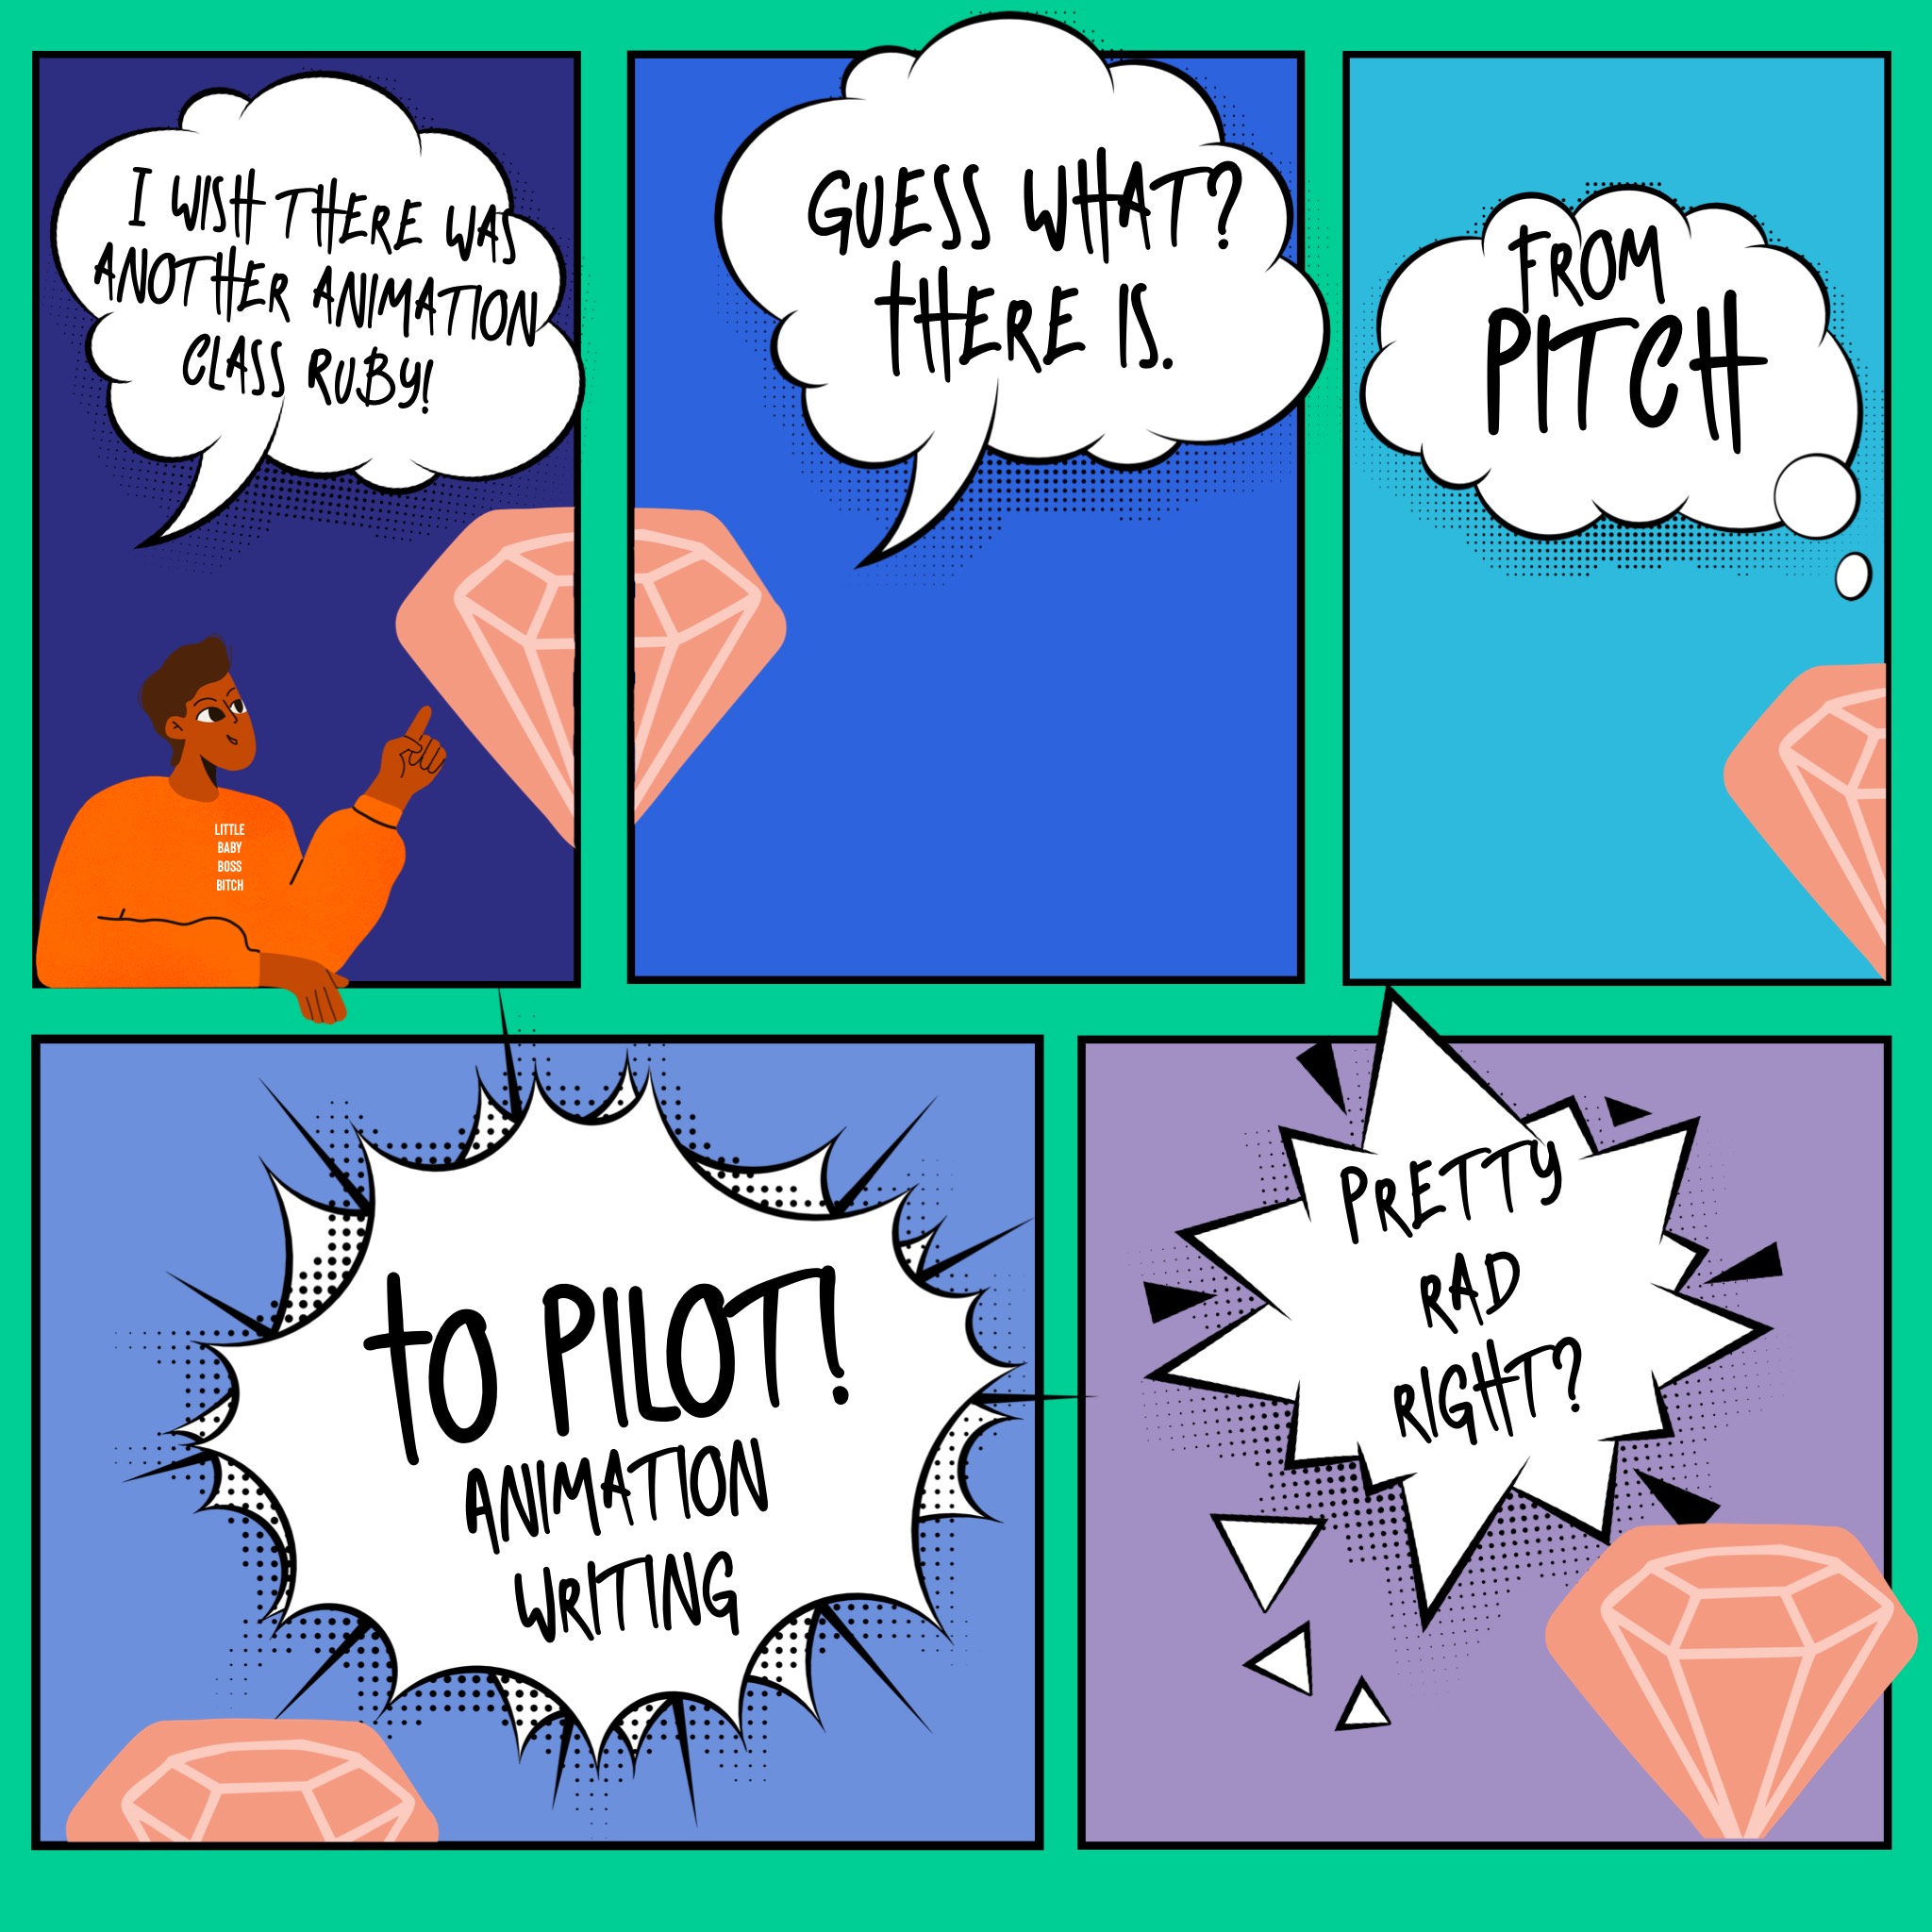 Pitch to Pilot Animation Writing - ONLINE CLASS (Wednesdays)